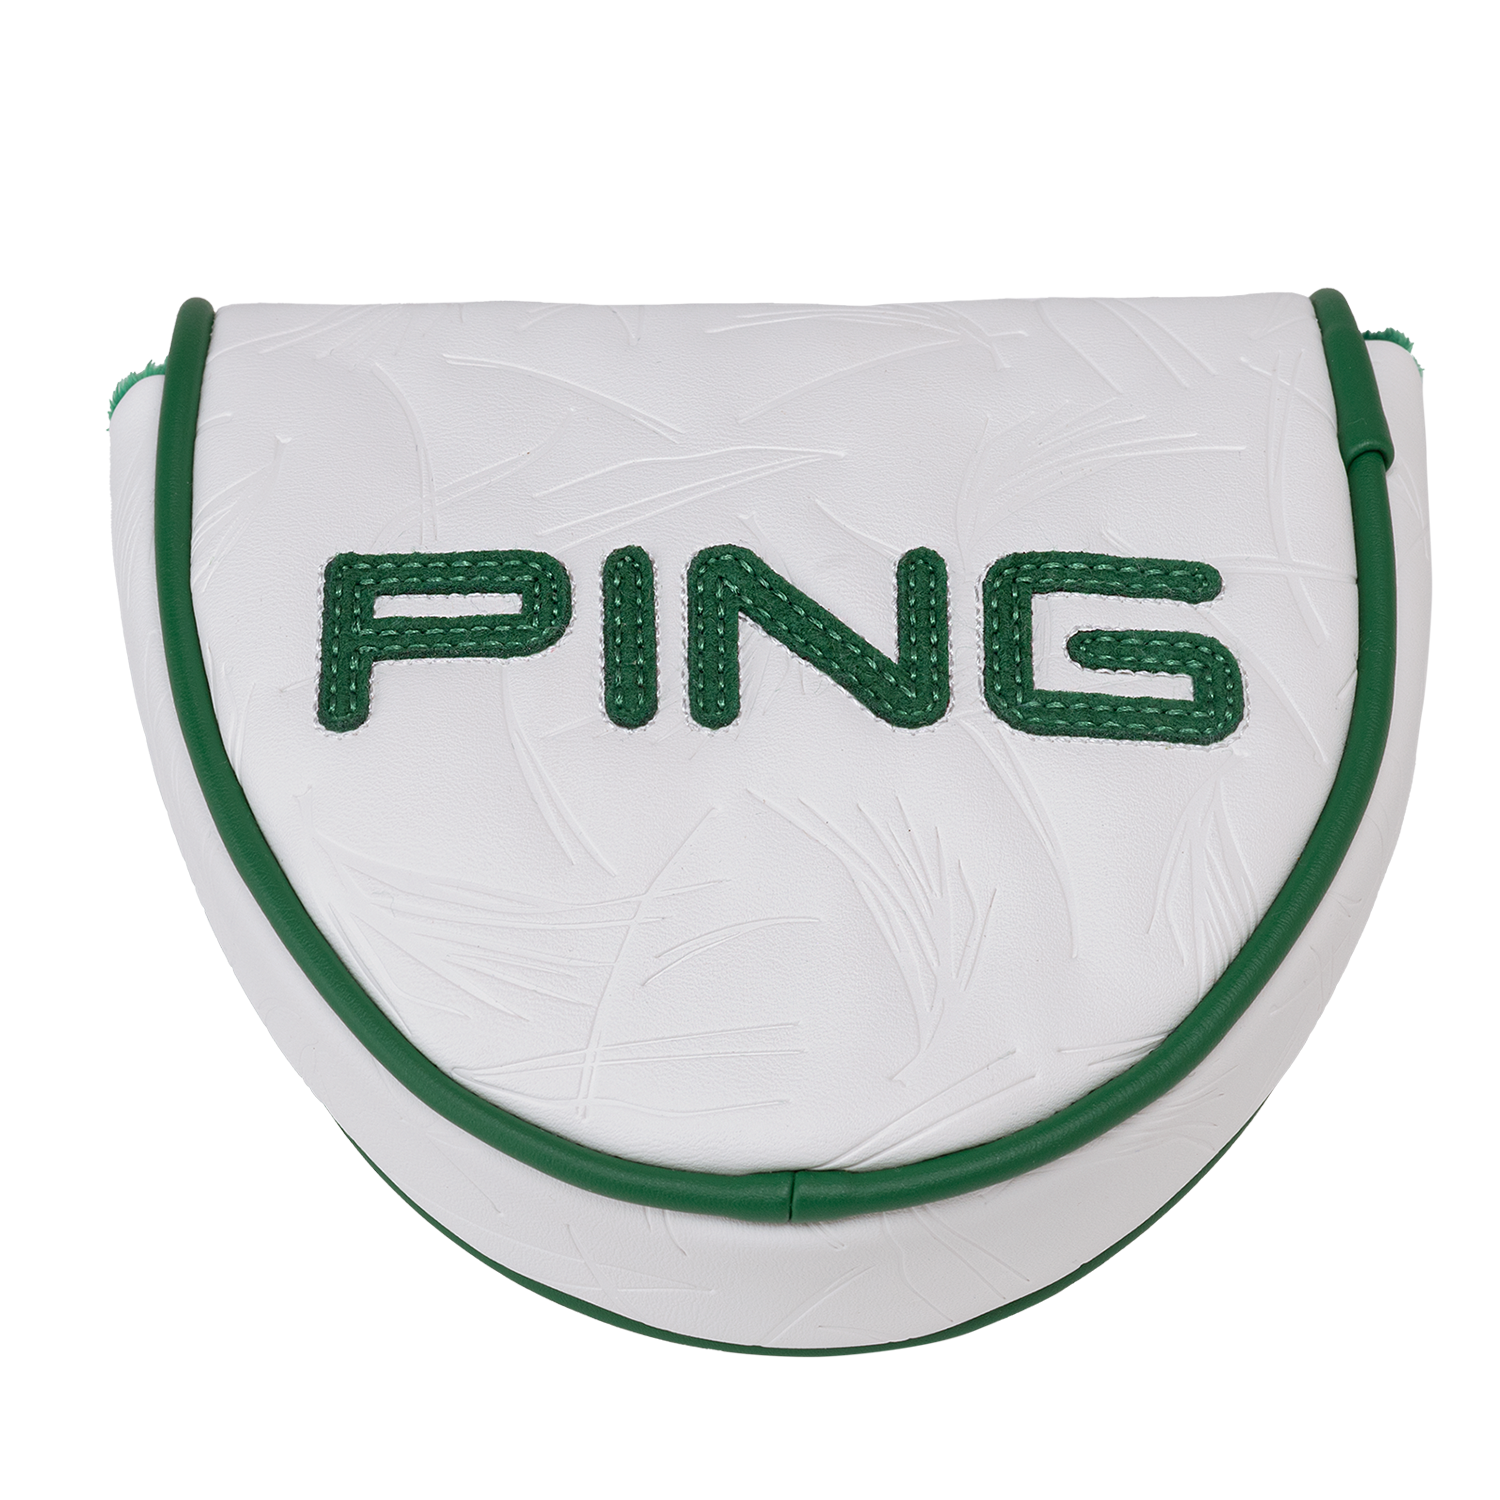 PING Looper Mallet Golf Putter Headcover